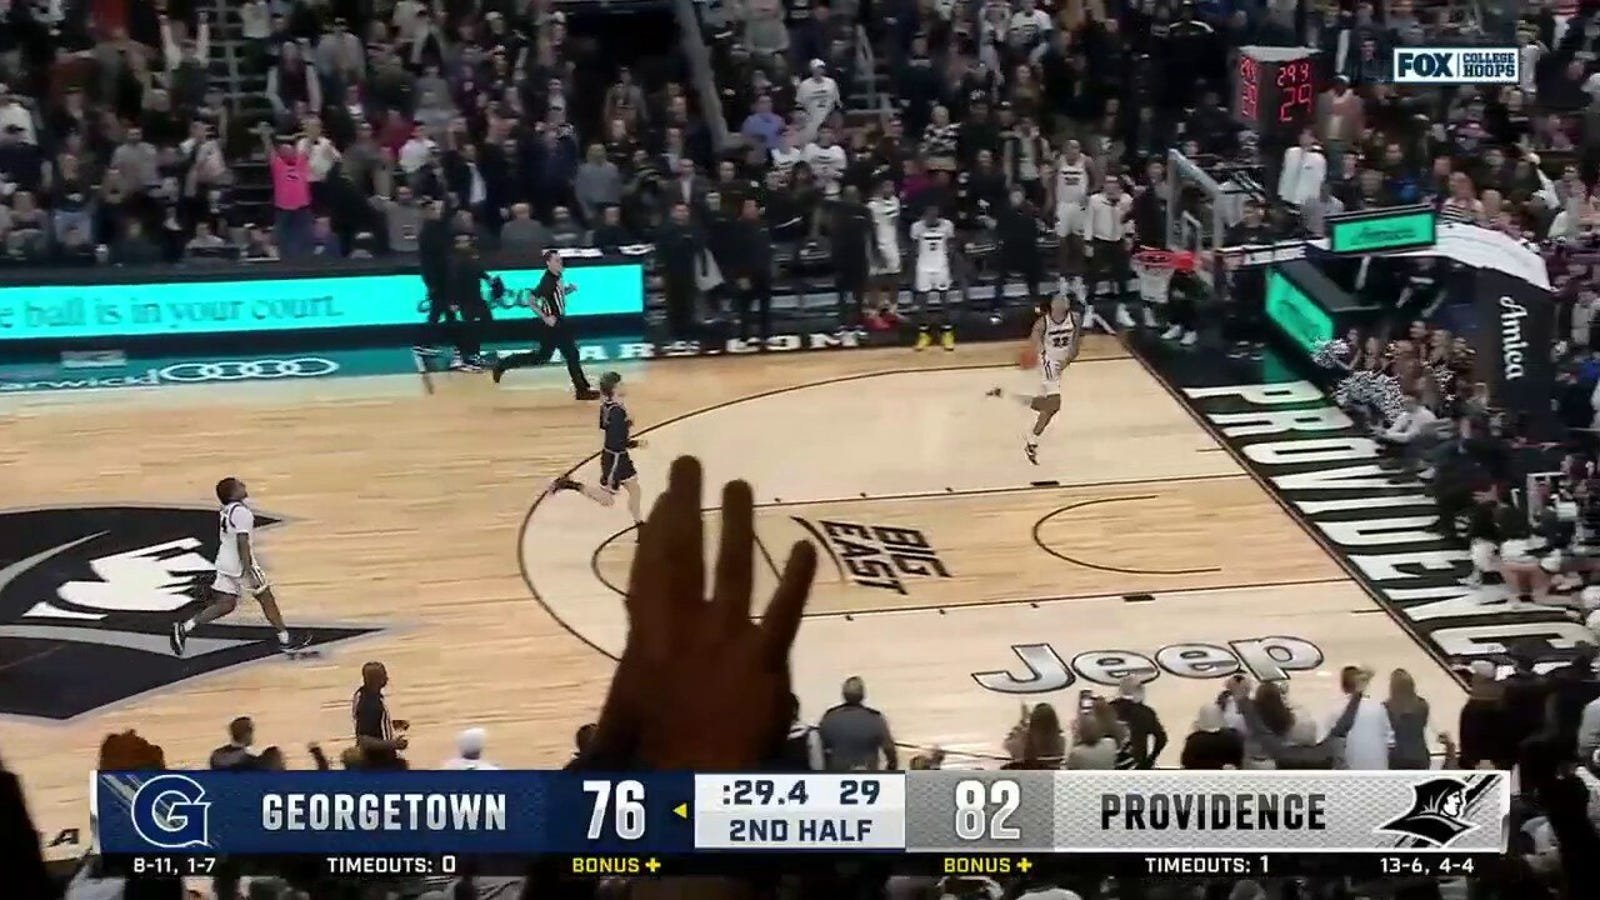 Devin Carter throws down a NASTY windmill jam to seal Providence's victory over Georgetown